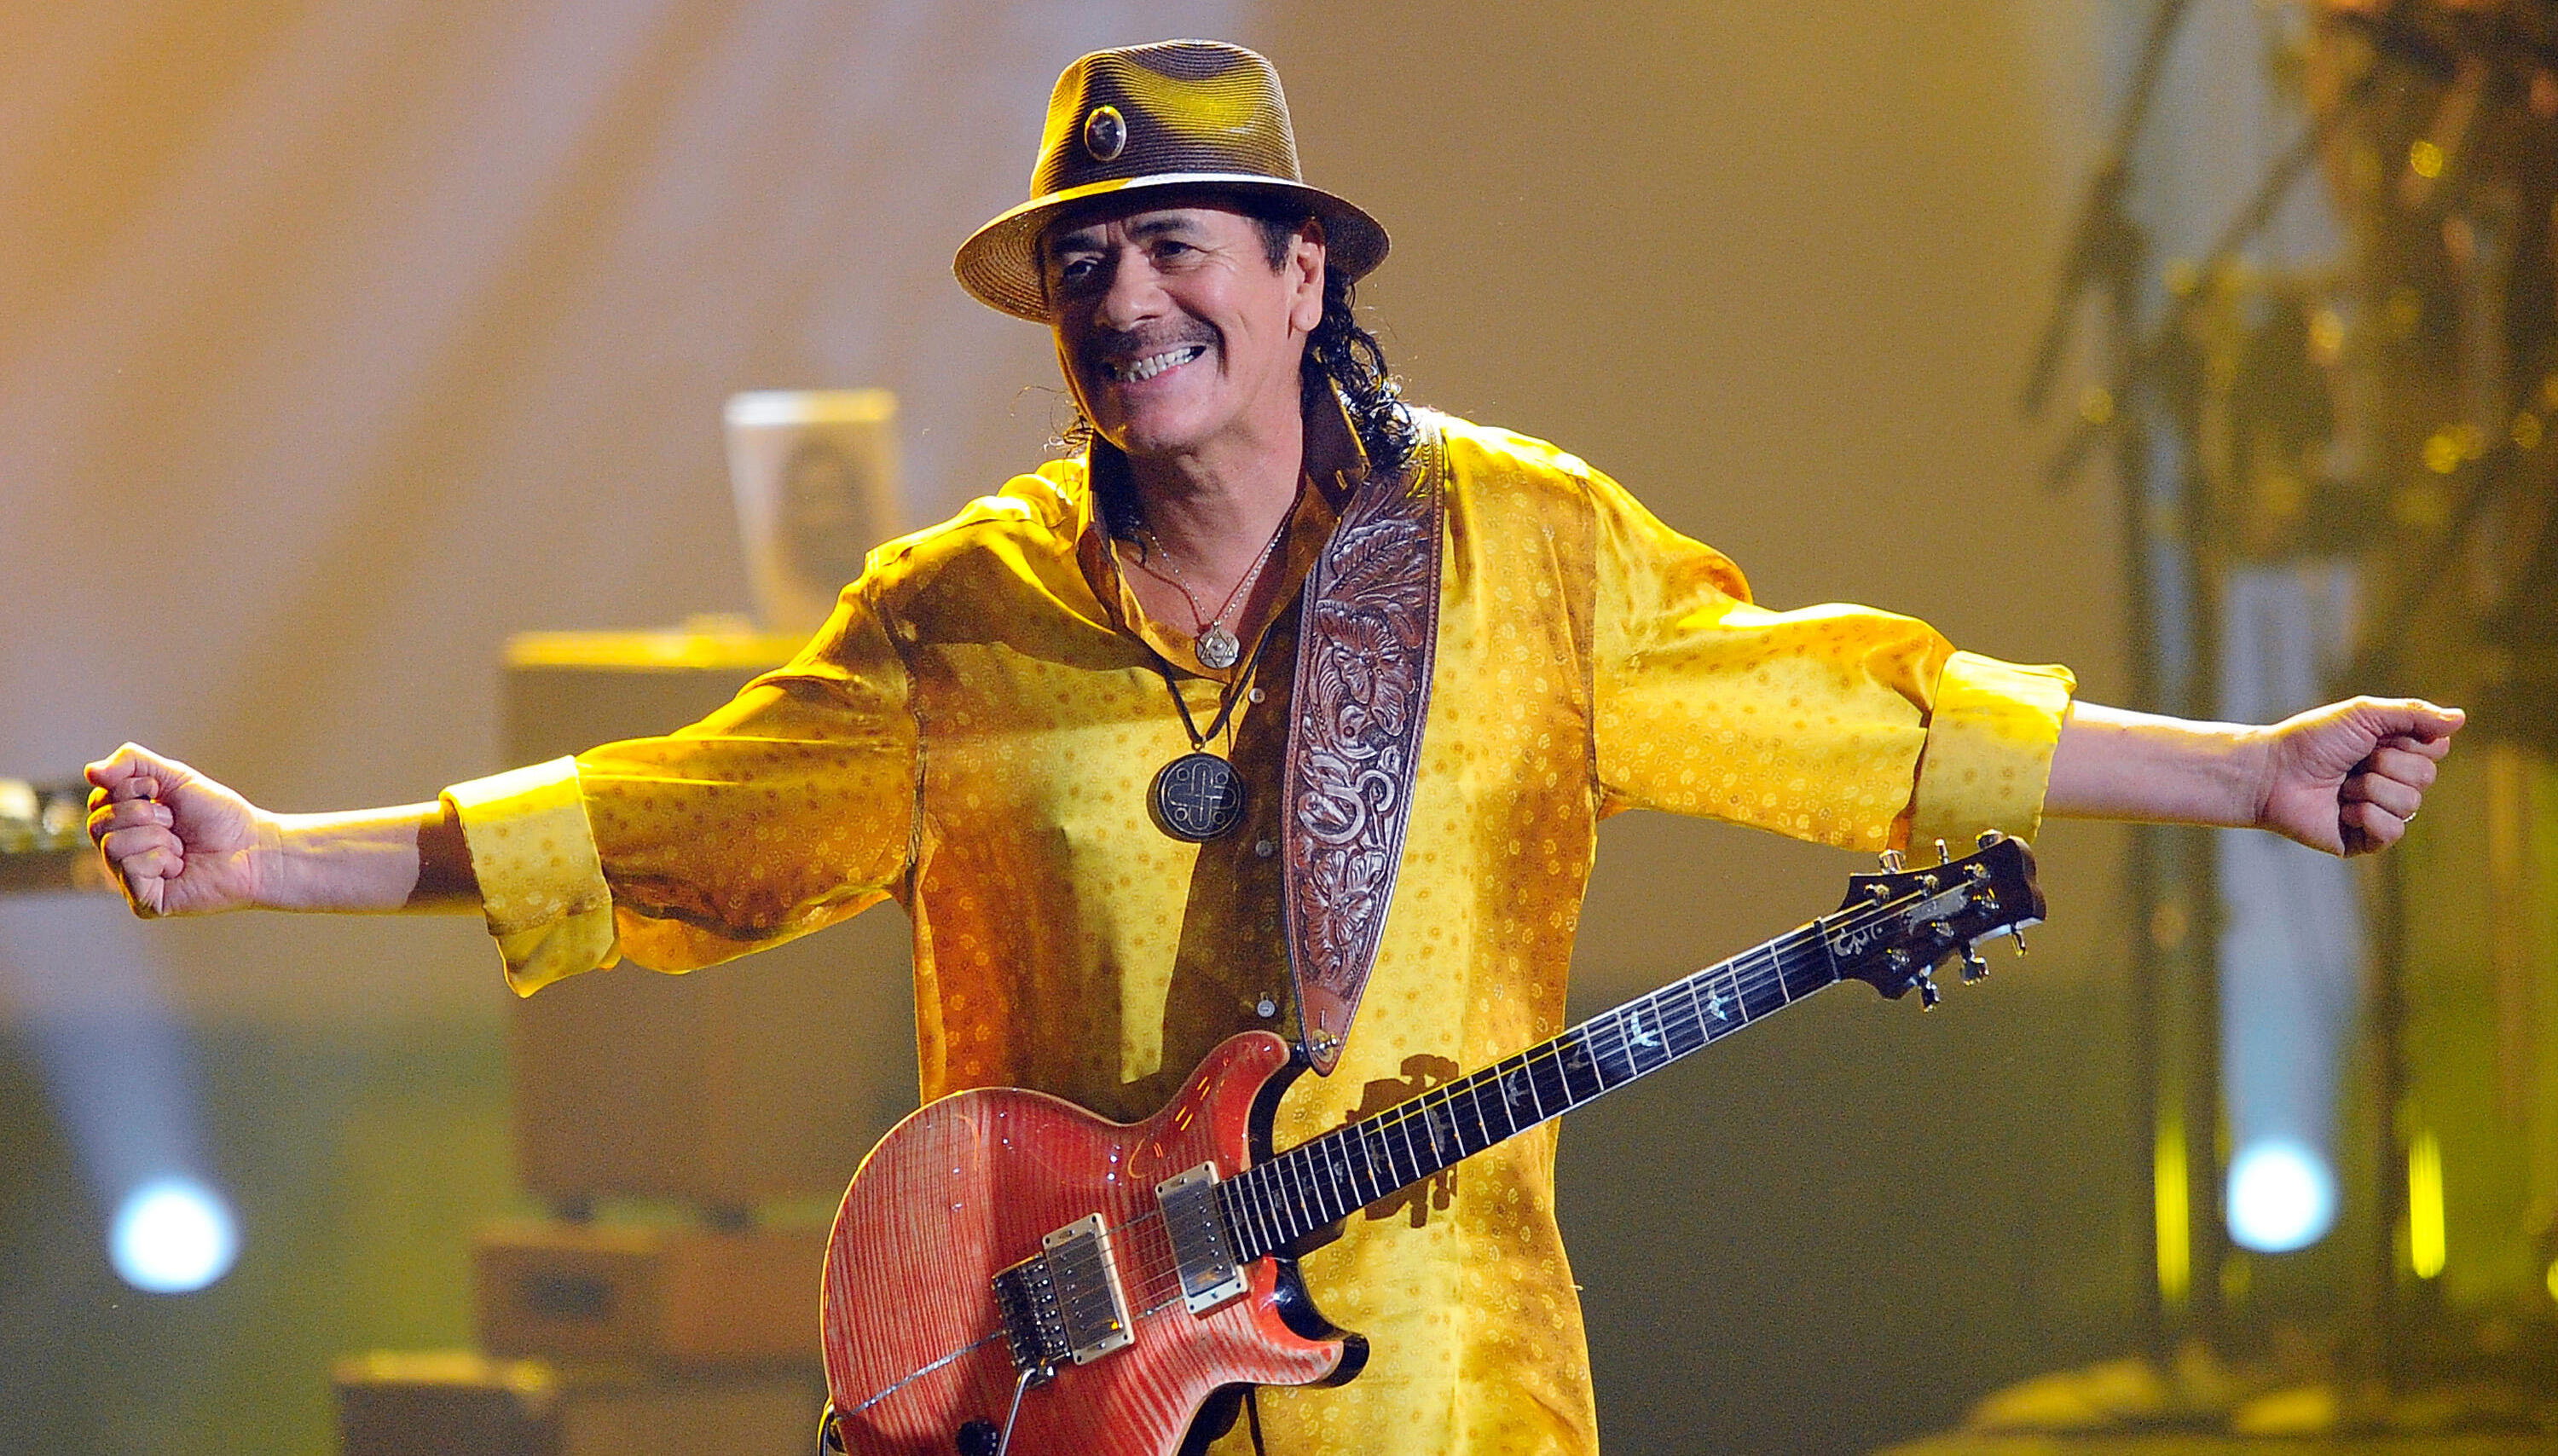 Carlos Santana: Woodstock? That was when my guitar turned into a snake